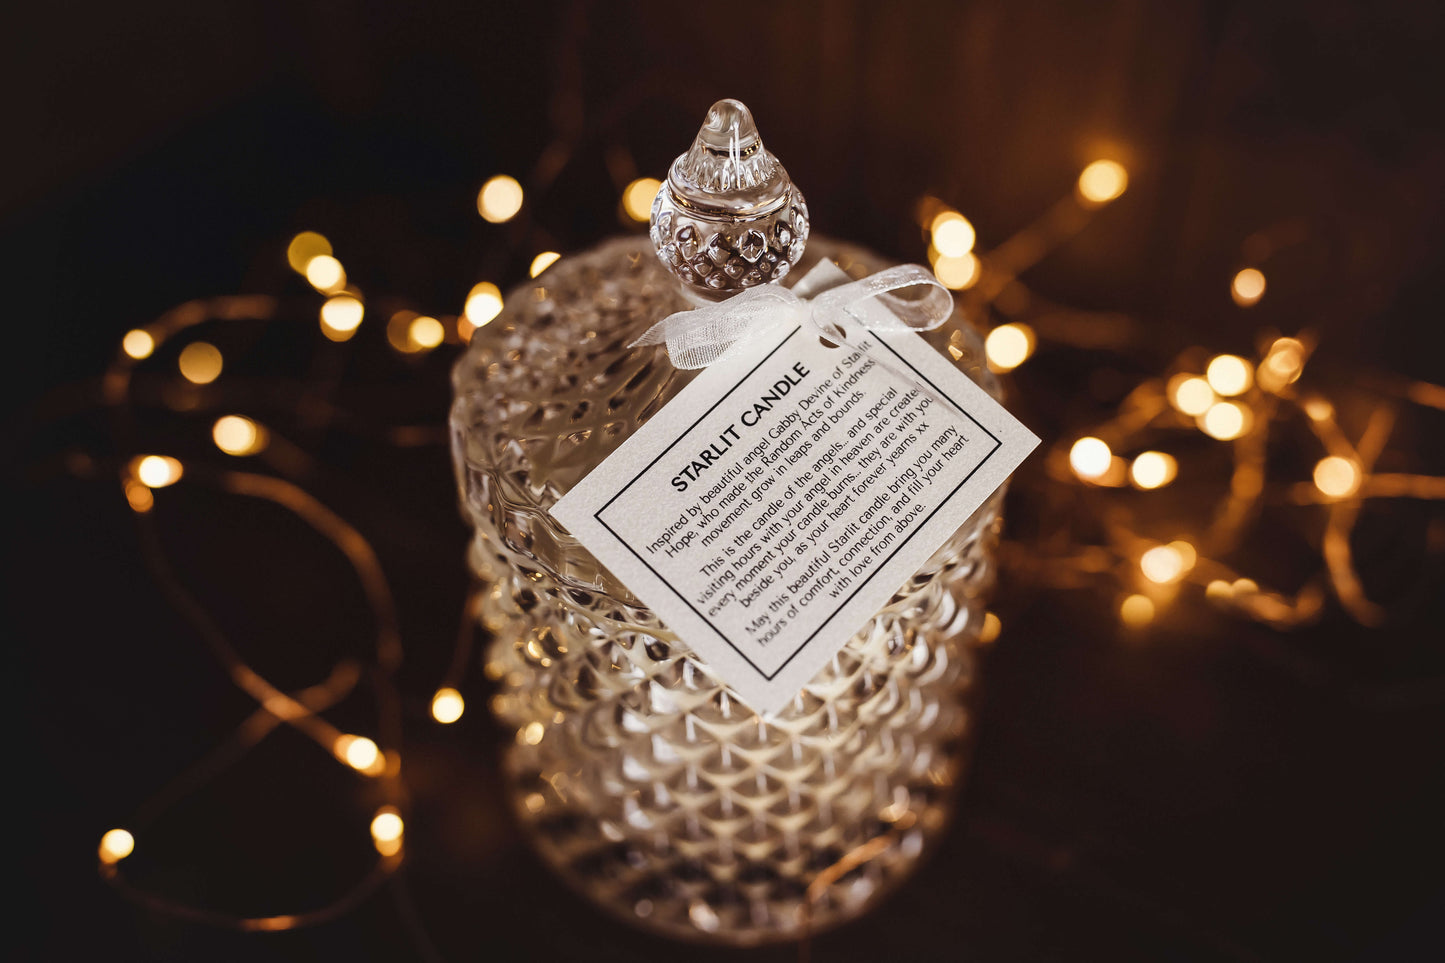 The Starlit candle with the swingtag that accompanies each scented candle. The vessel can be used to keep cherished items once the candle has reached the end of its journey.